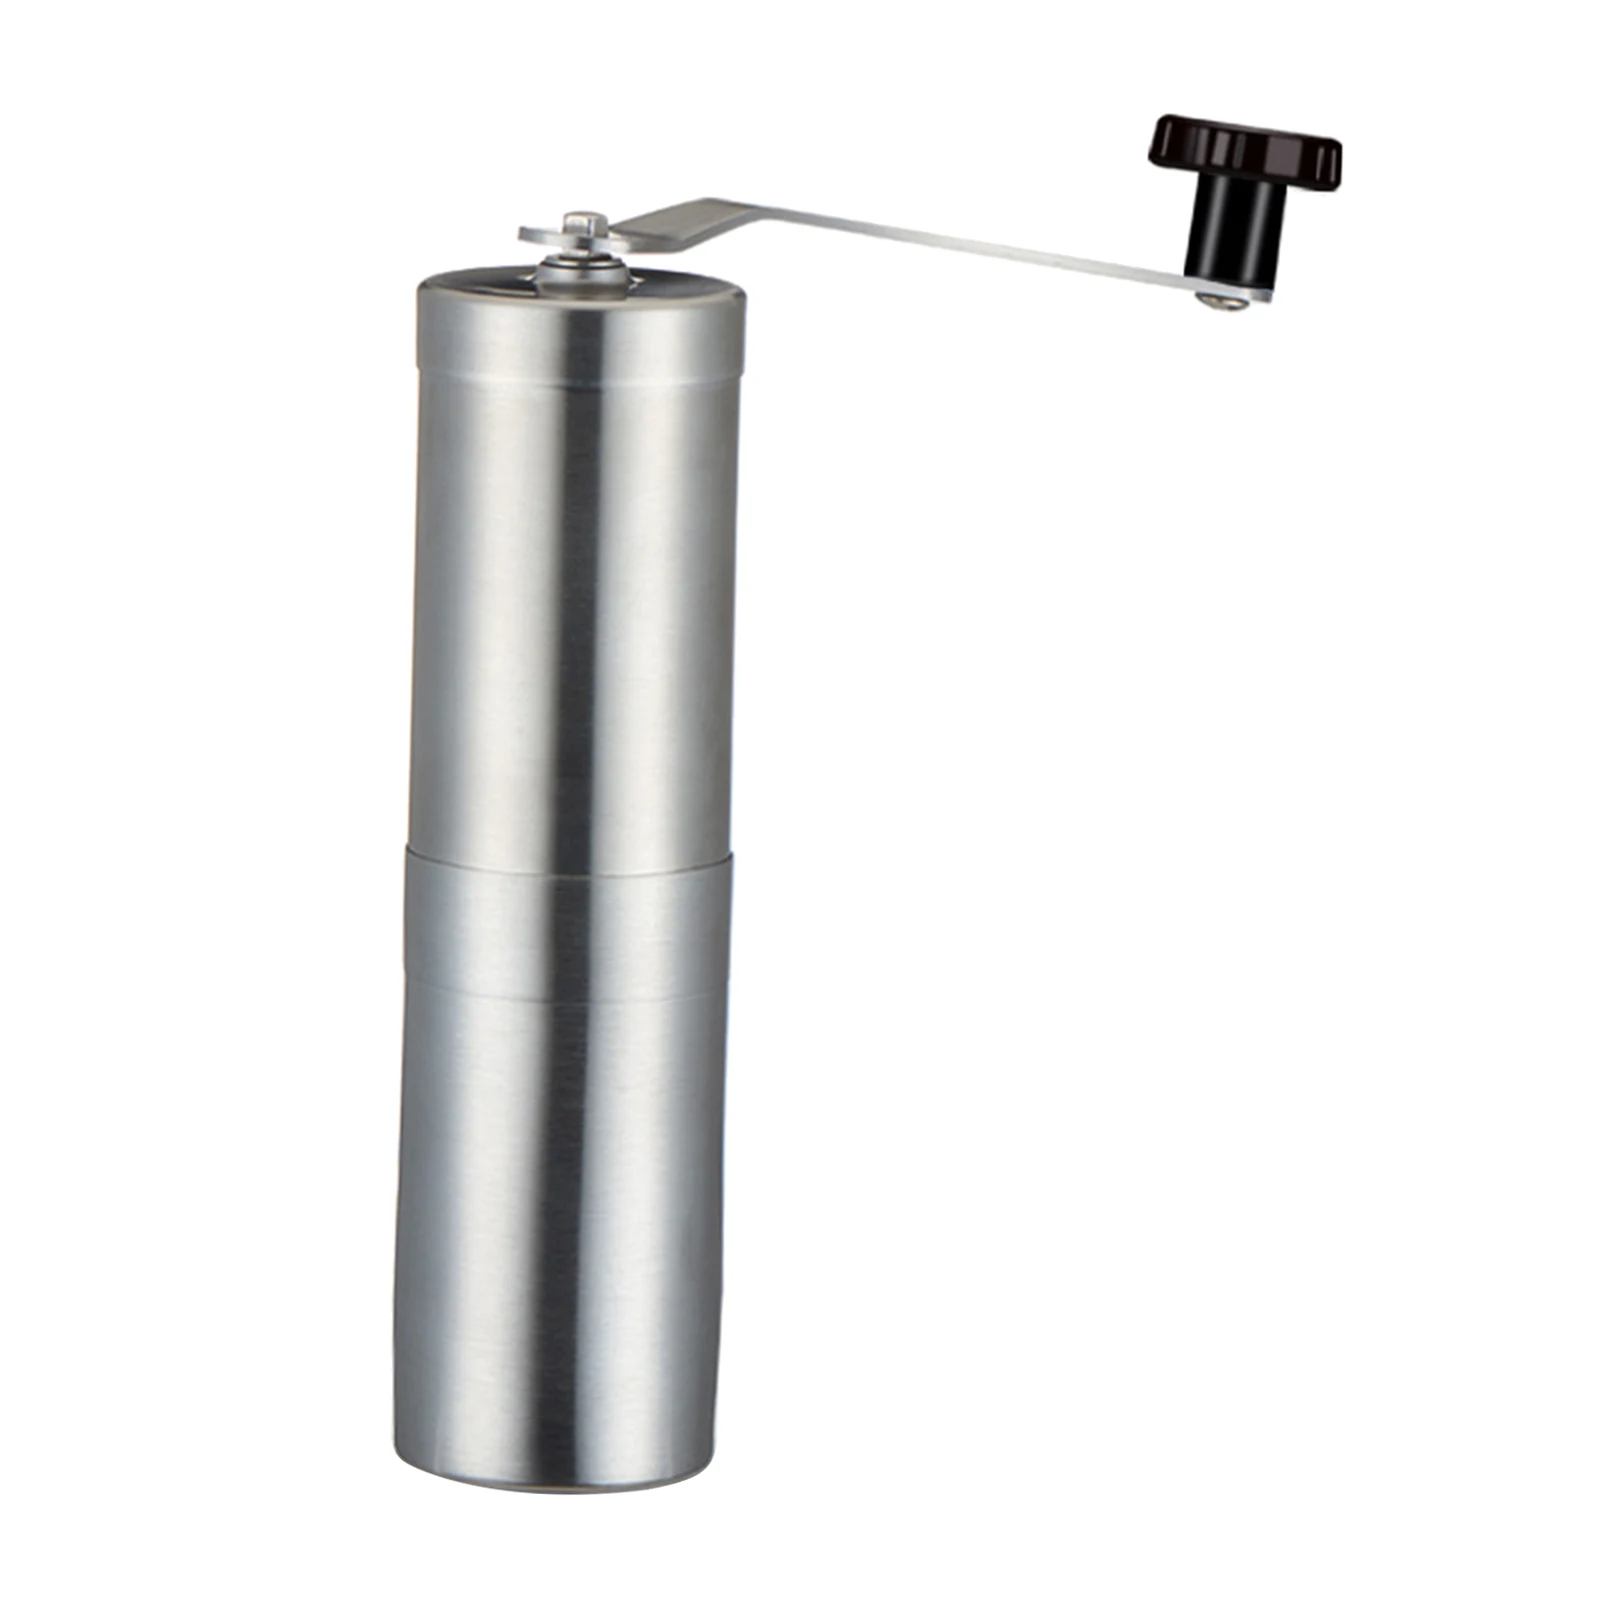 Manual Coffee Grinder Stainless Steel with Adjustable Ceramic Conical Burr Hand Crank Coffee Mill